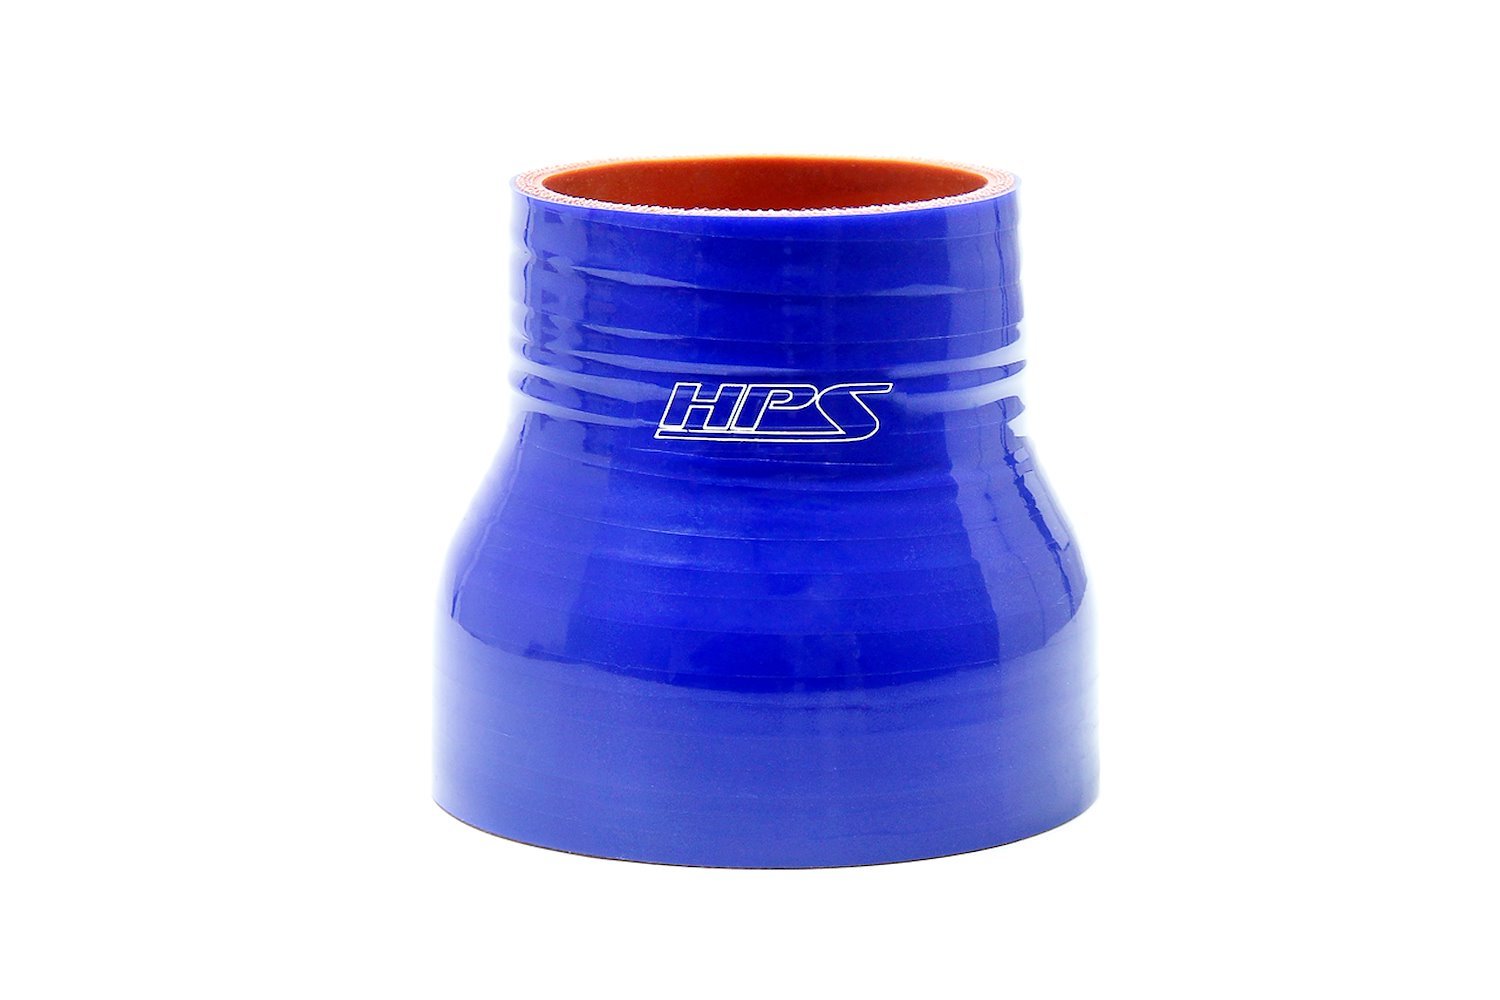 HTSR-225-238-BLUE Silicone Reducer Hose, High-Temp 4-Ply Reinforced, 2-1/4 in. - 2-3/8 in. ID, 3 in. Long, Blue